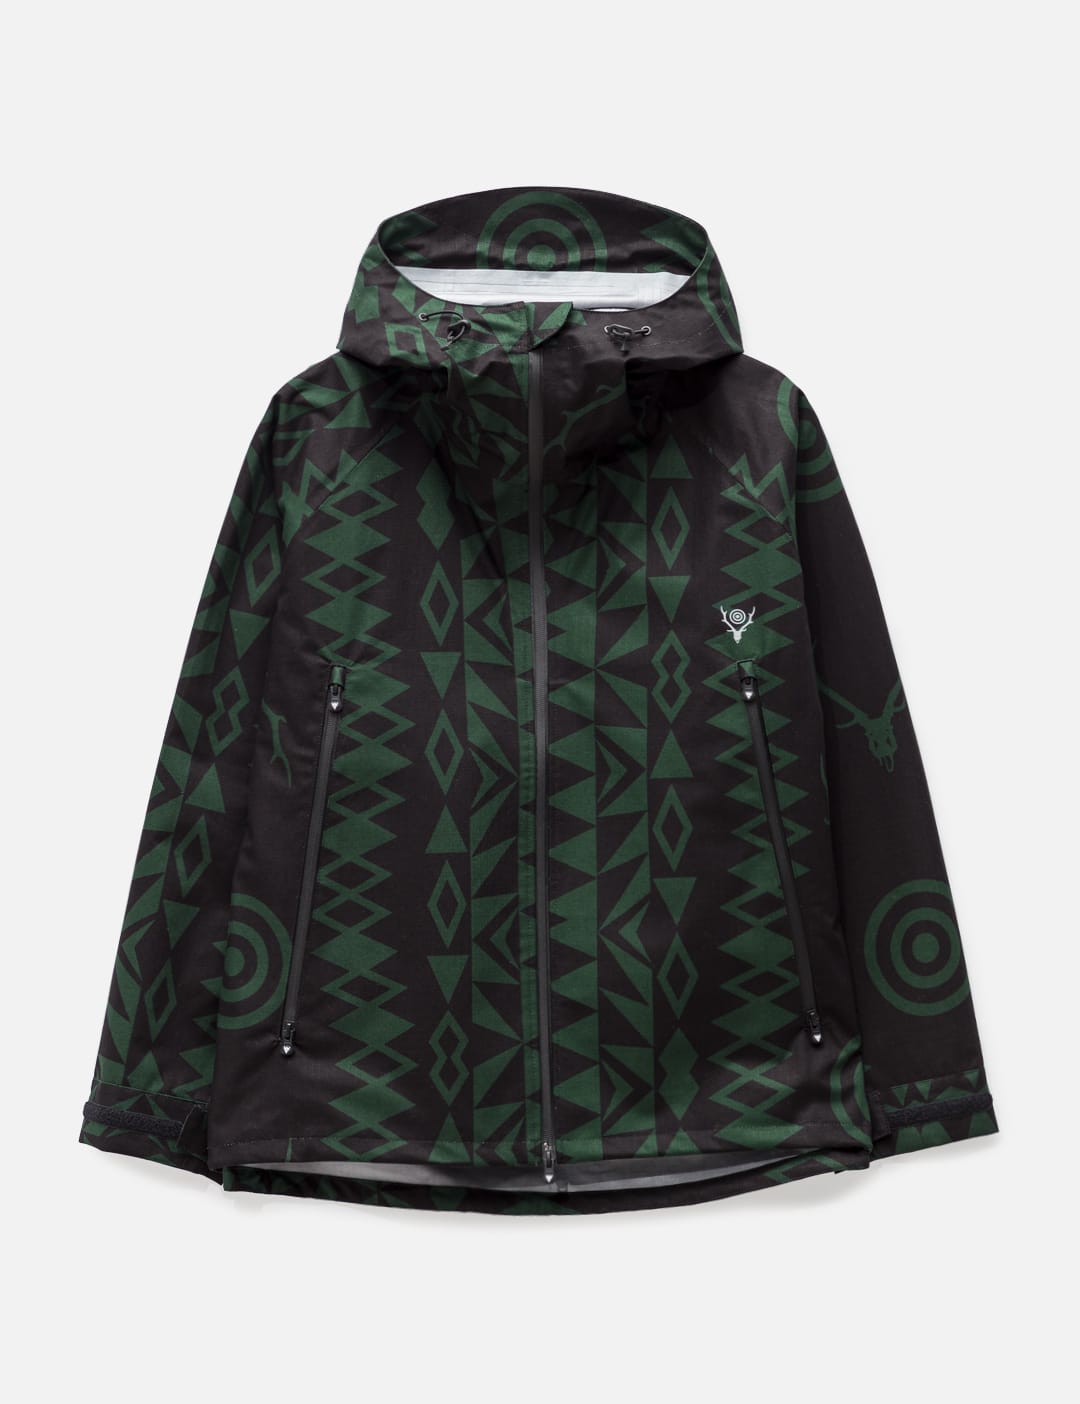 South2 West8 - WEATHER EFFECT JACKET | HBX - Globally